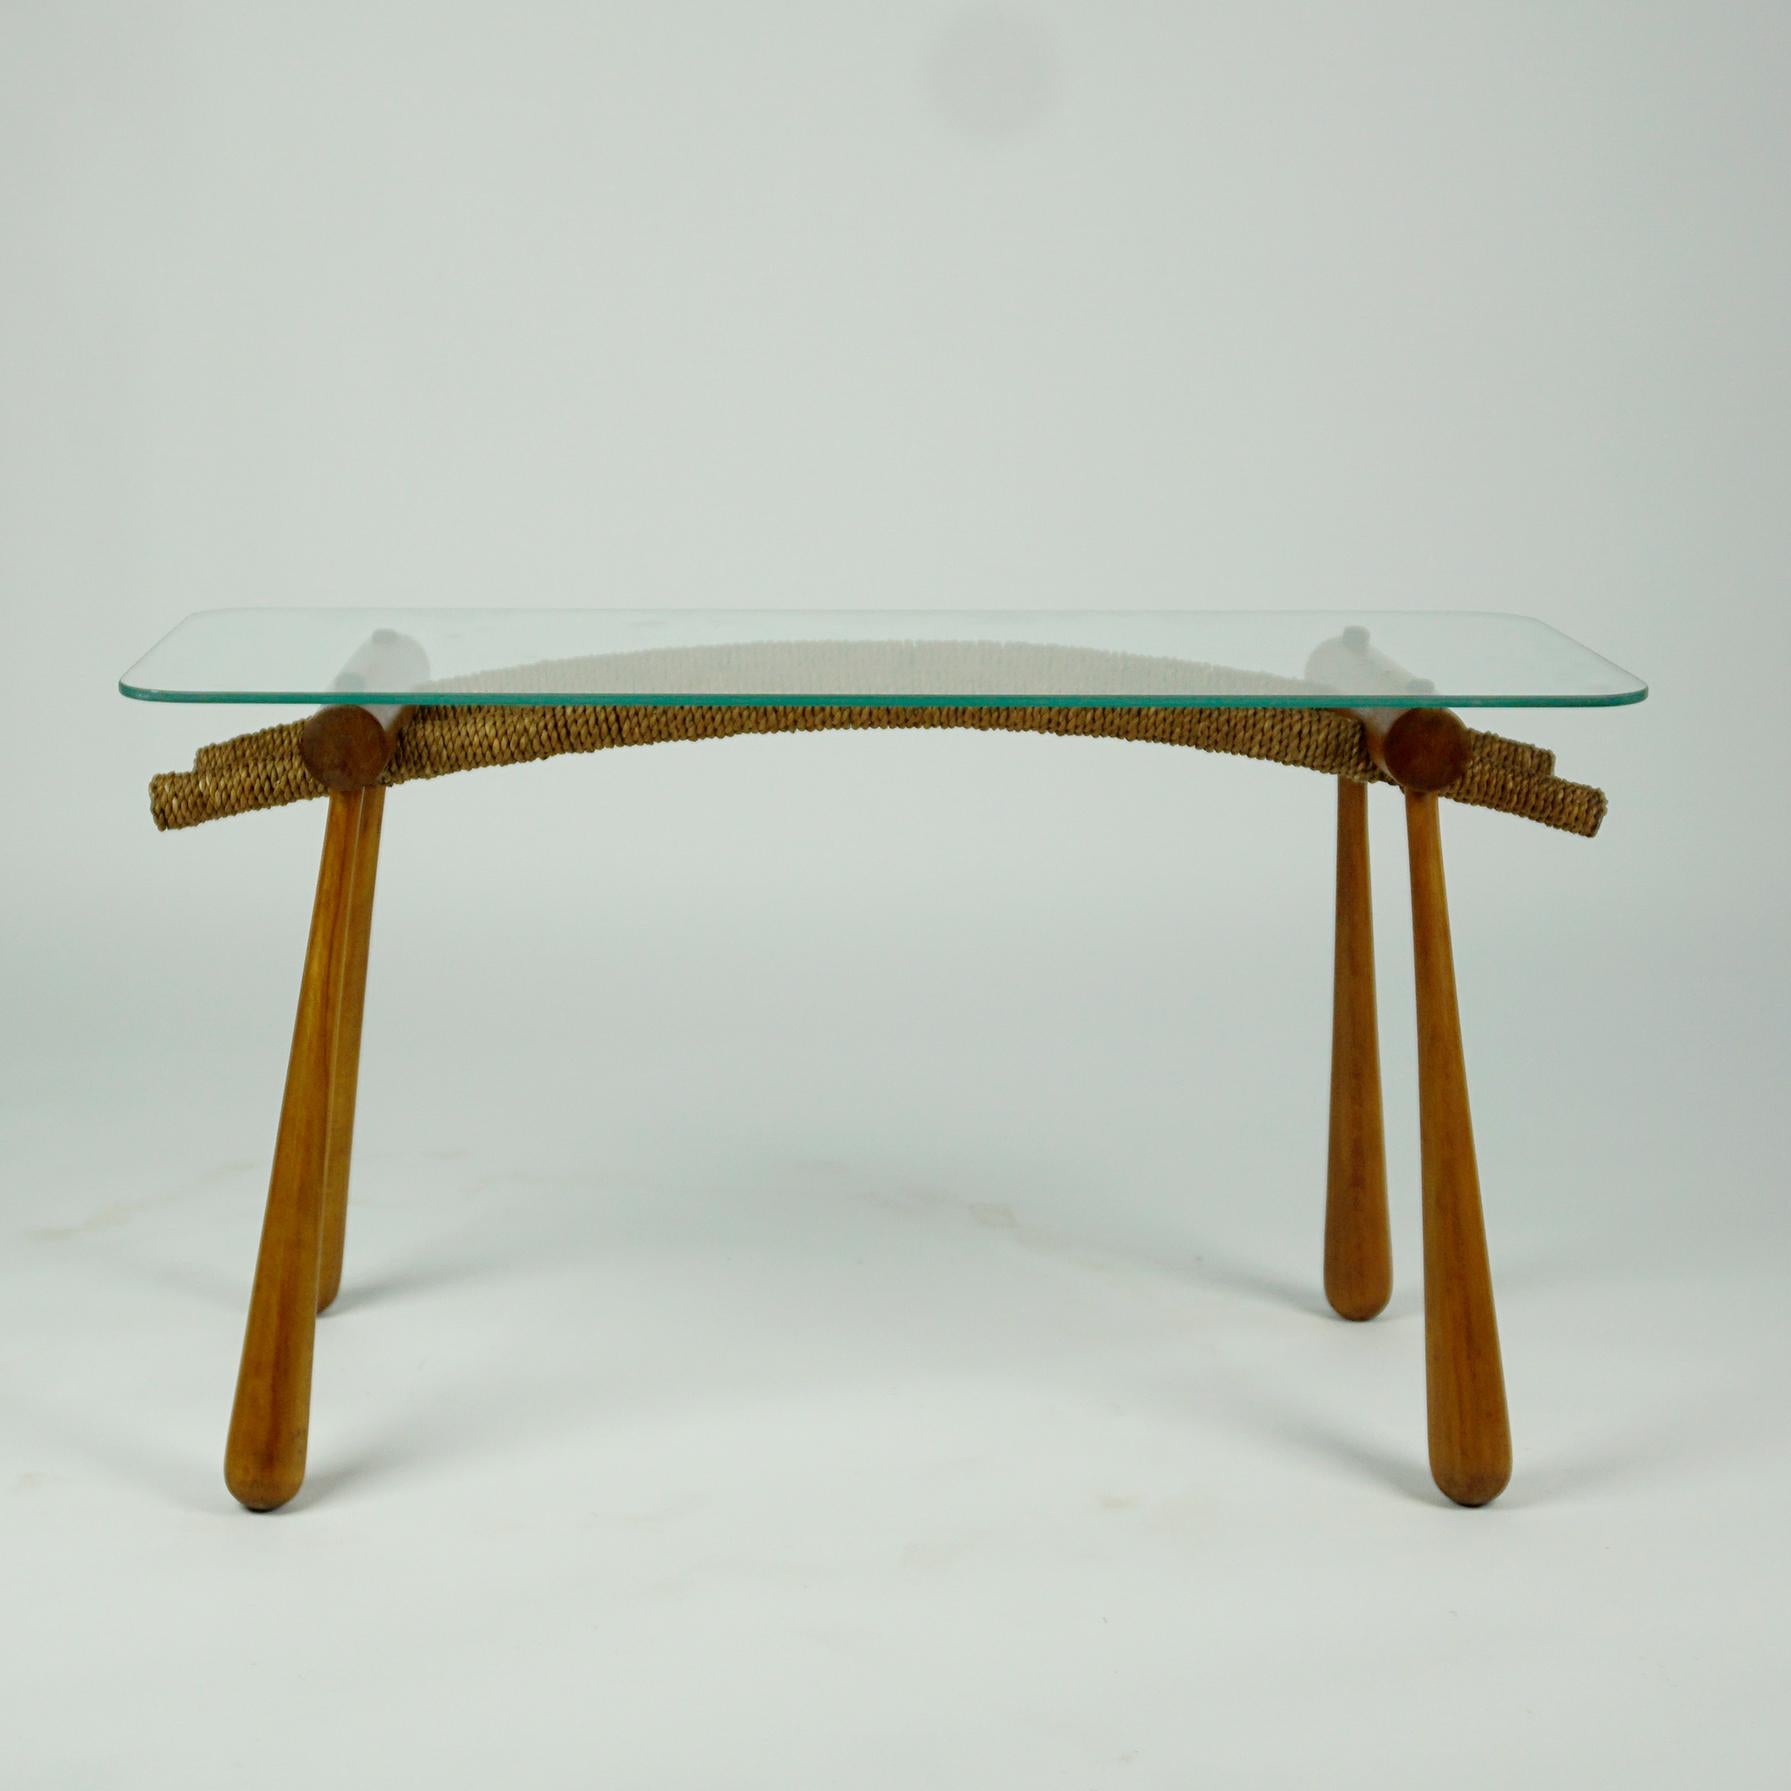 Amazing Austrian midcentury side table or coffee table designed by the Austrian Architect Max Kment and manufactured by his Kunstgewerbliche Werkstätte in Vienna in the early 1950s.
The table features a stained beechwood frame, partly wrapped with